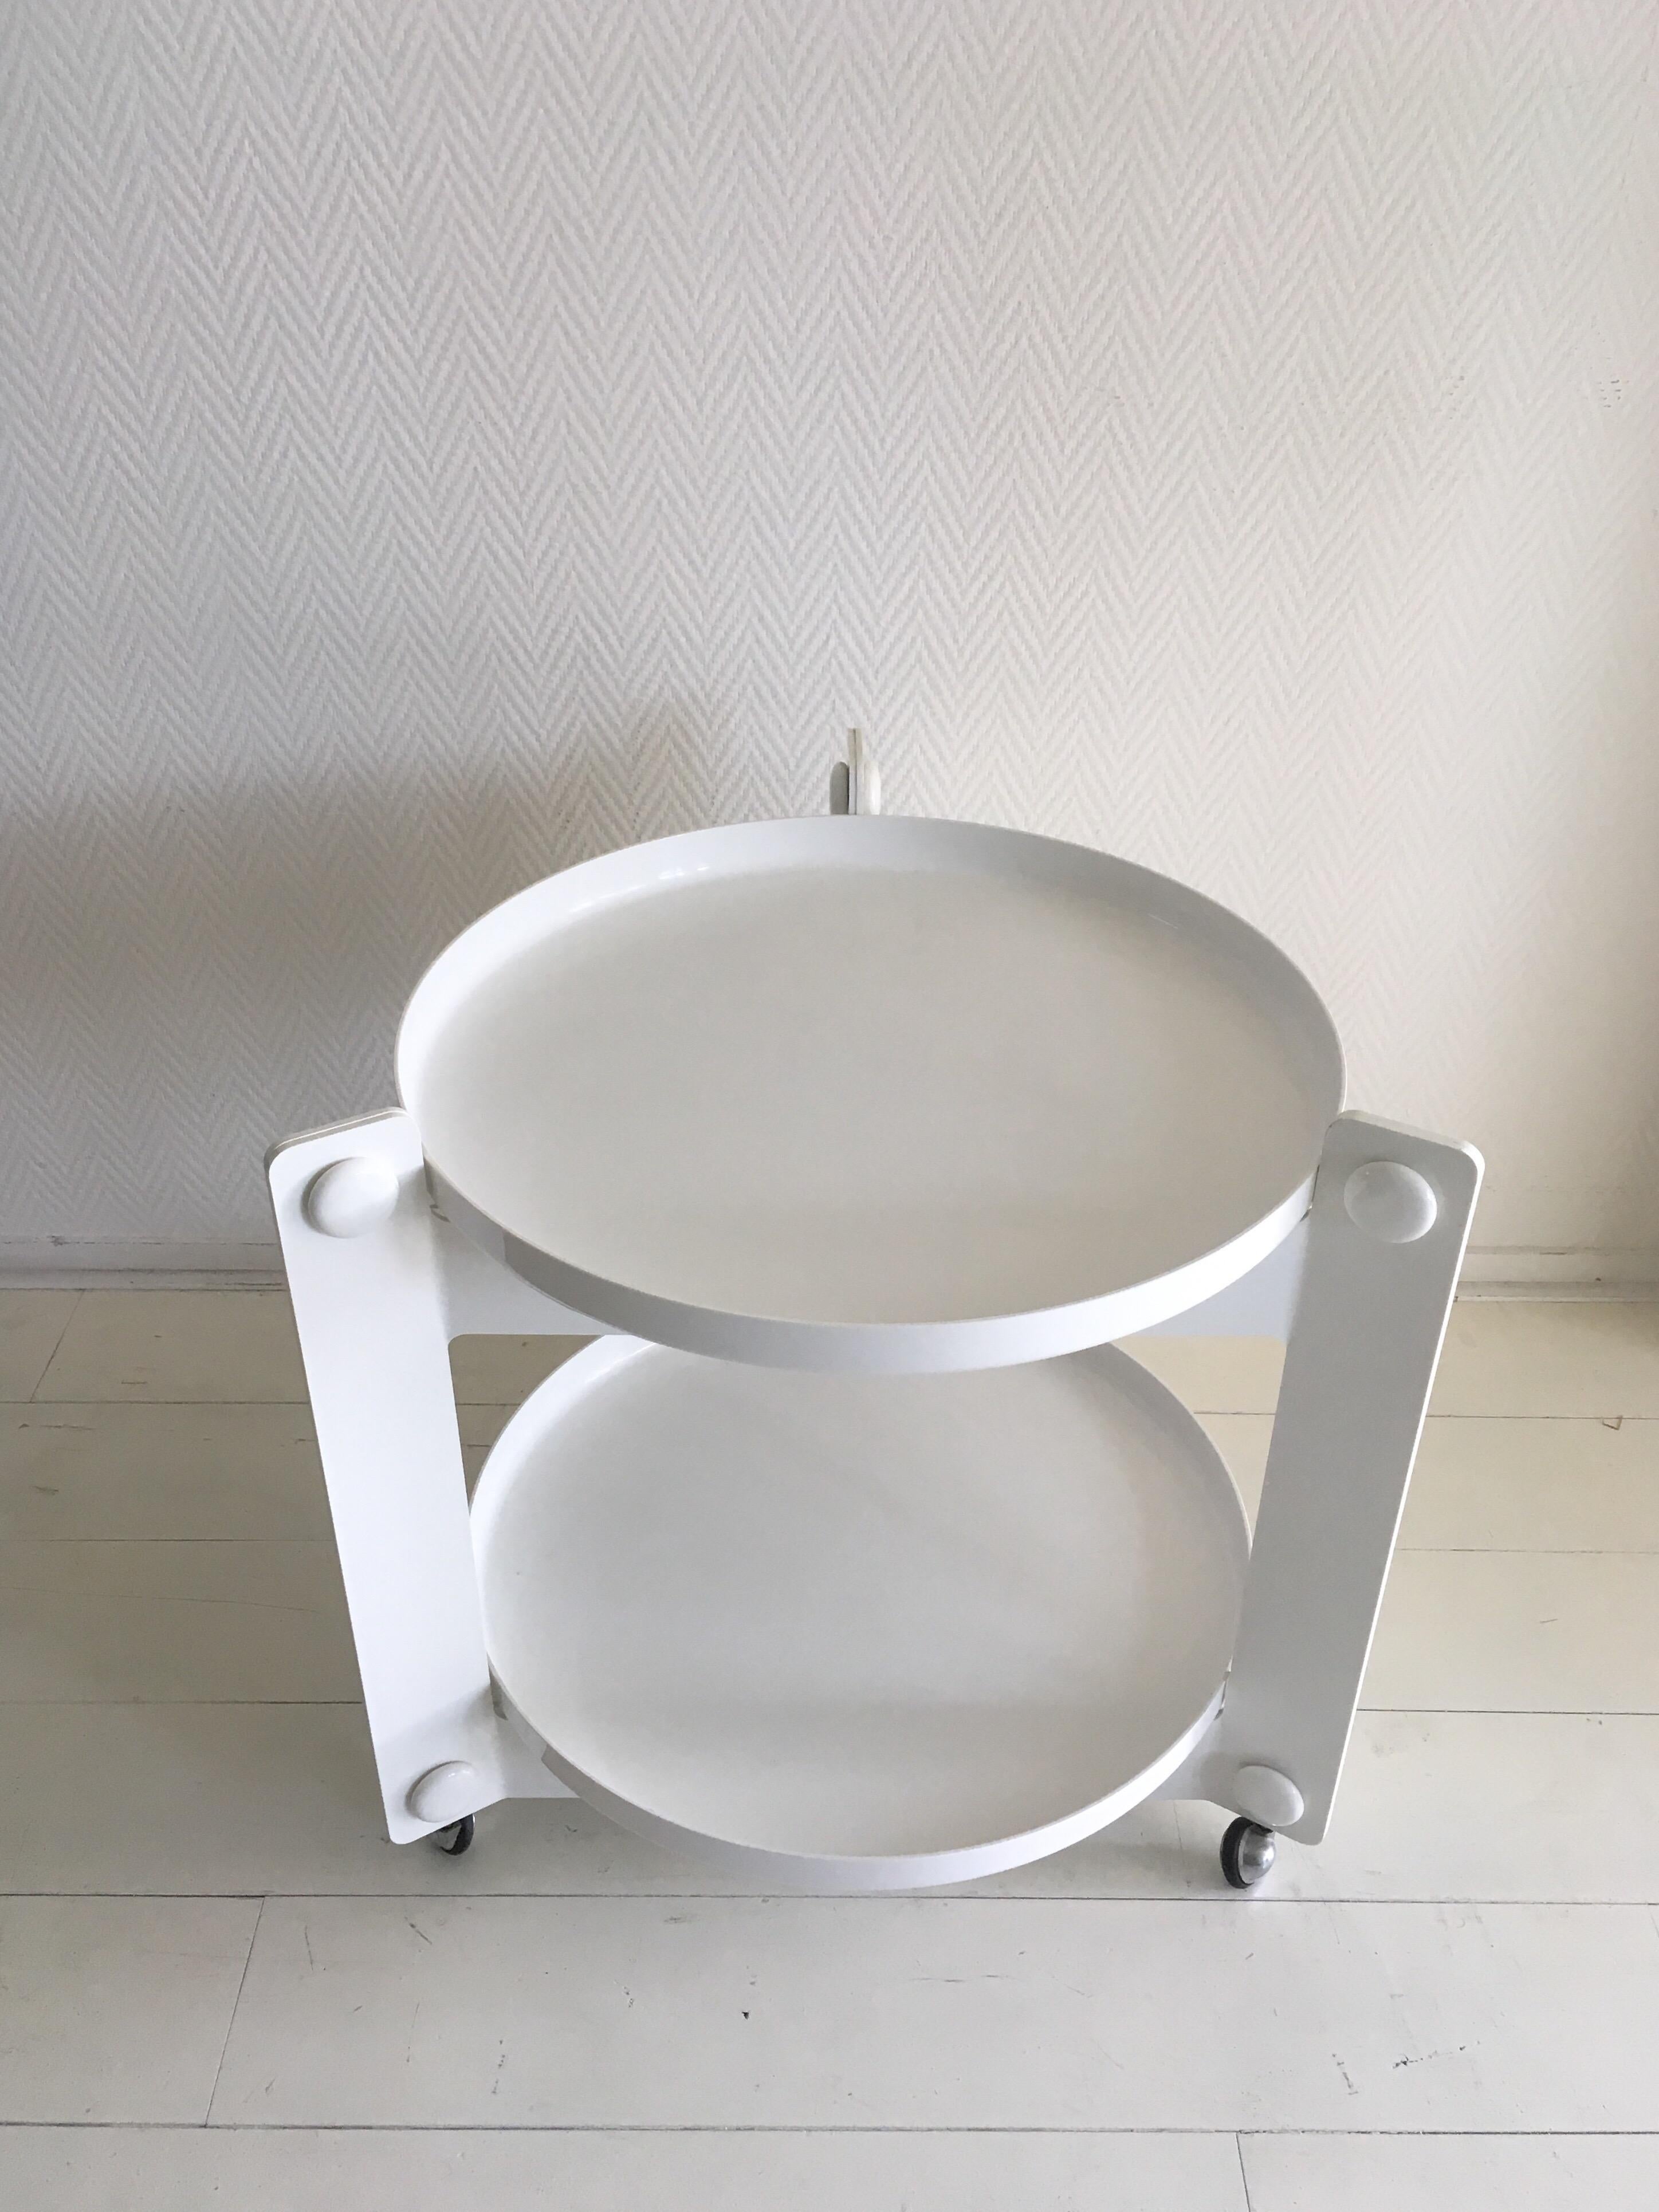 This Spage Age tray table was designed by Luigi Massoni for Guzzini, circa 1970s. It features two removable trays and remains in good condition with normal wear consisting it's age.